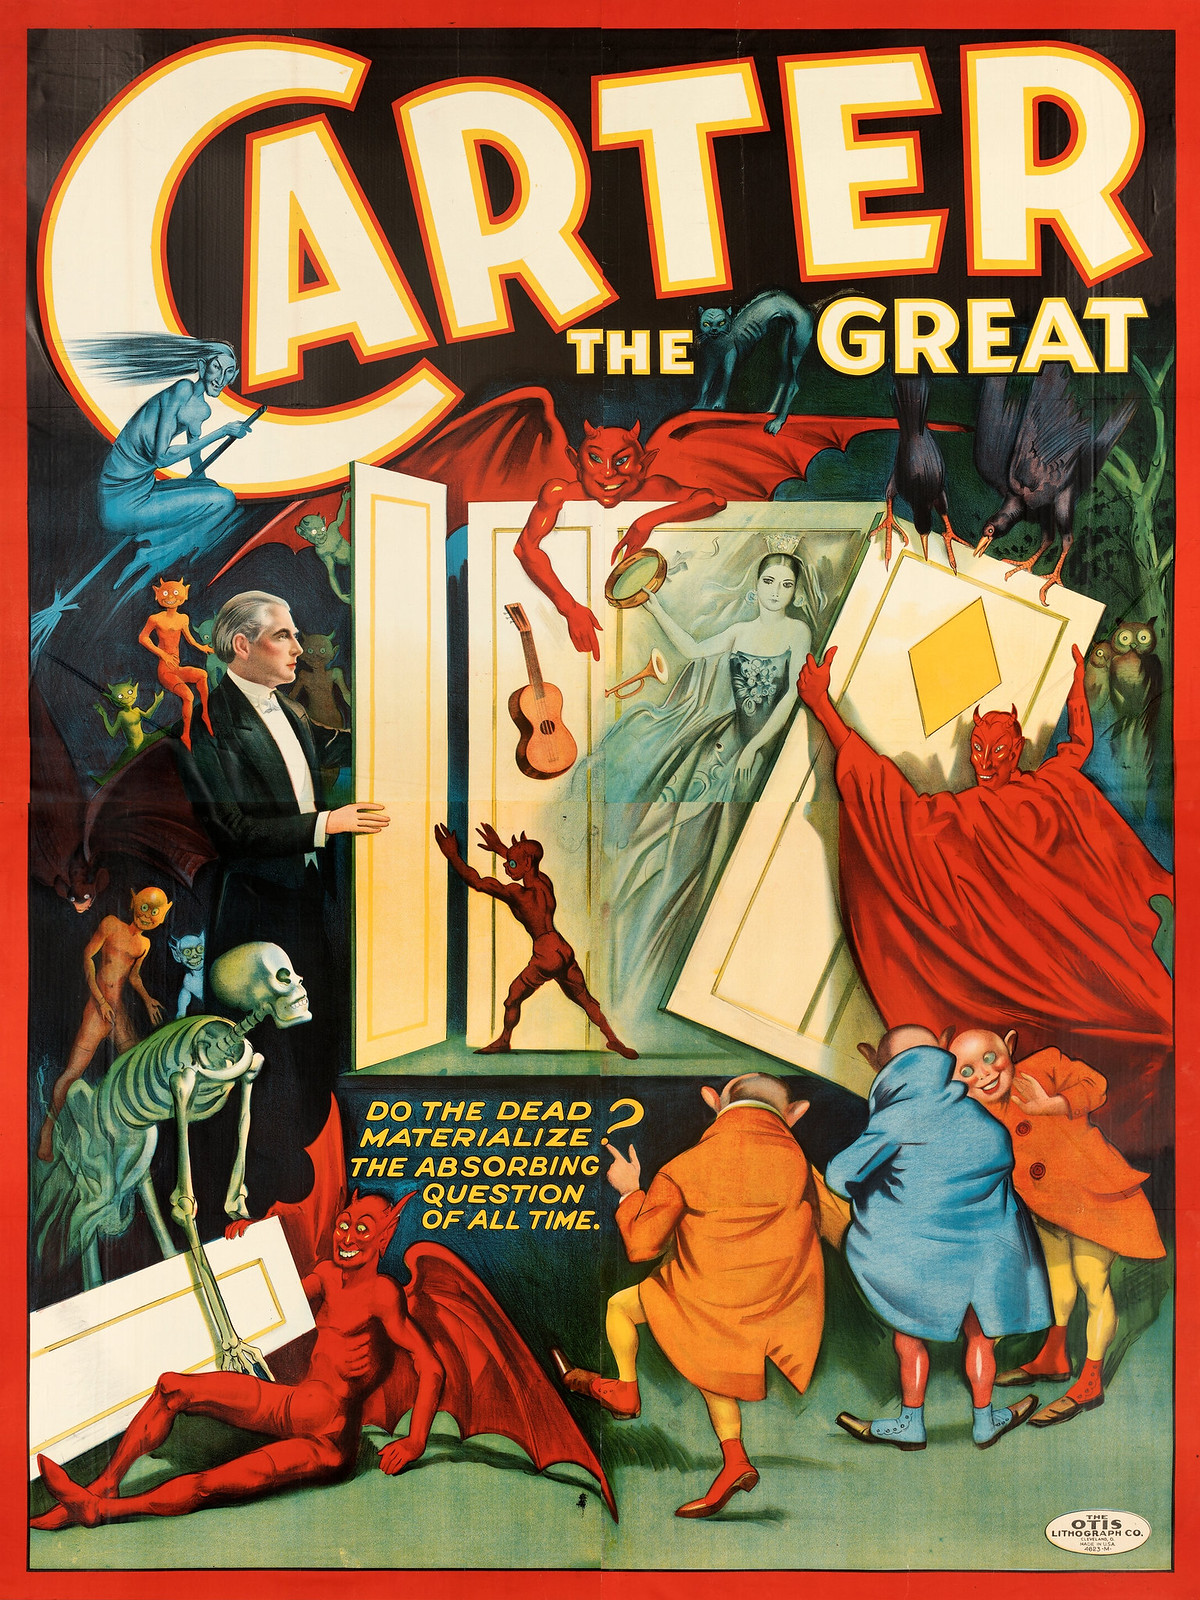 Carter the Great (c. 1926).